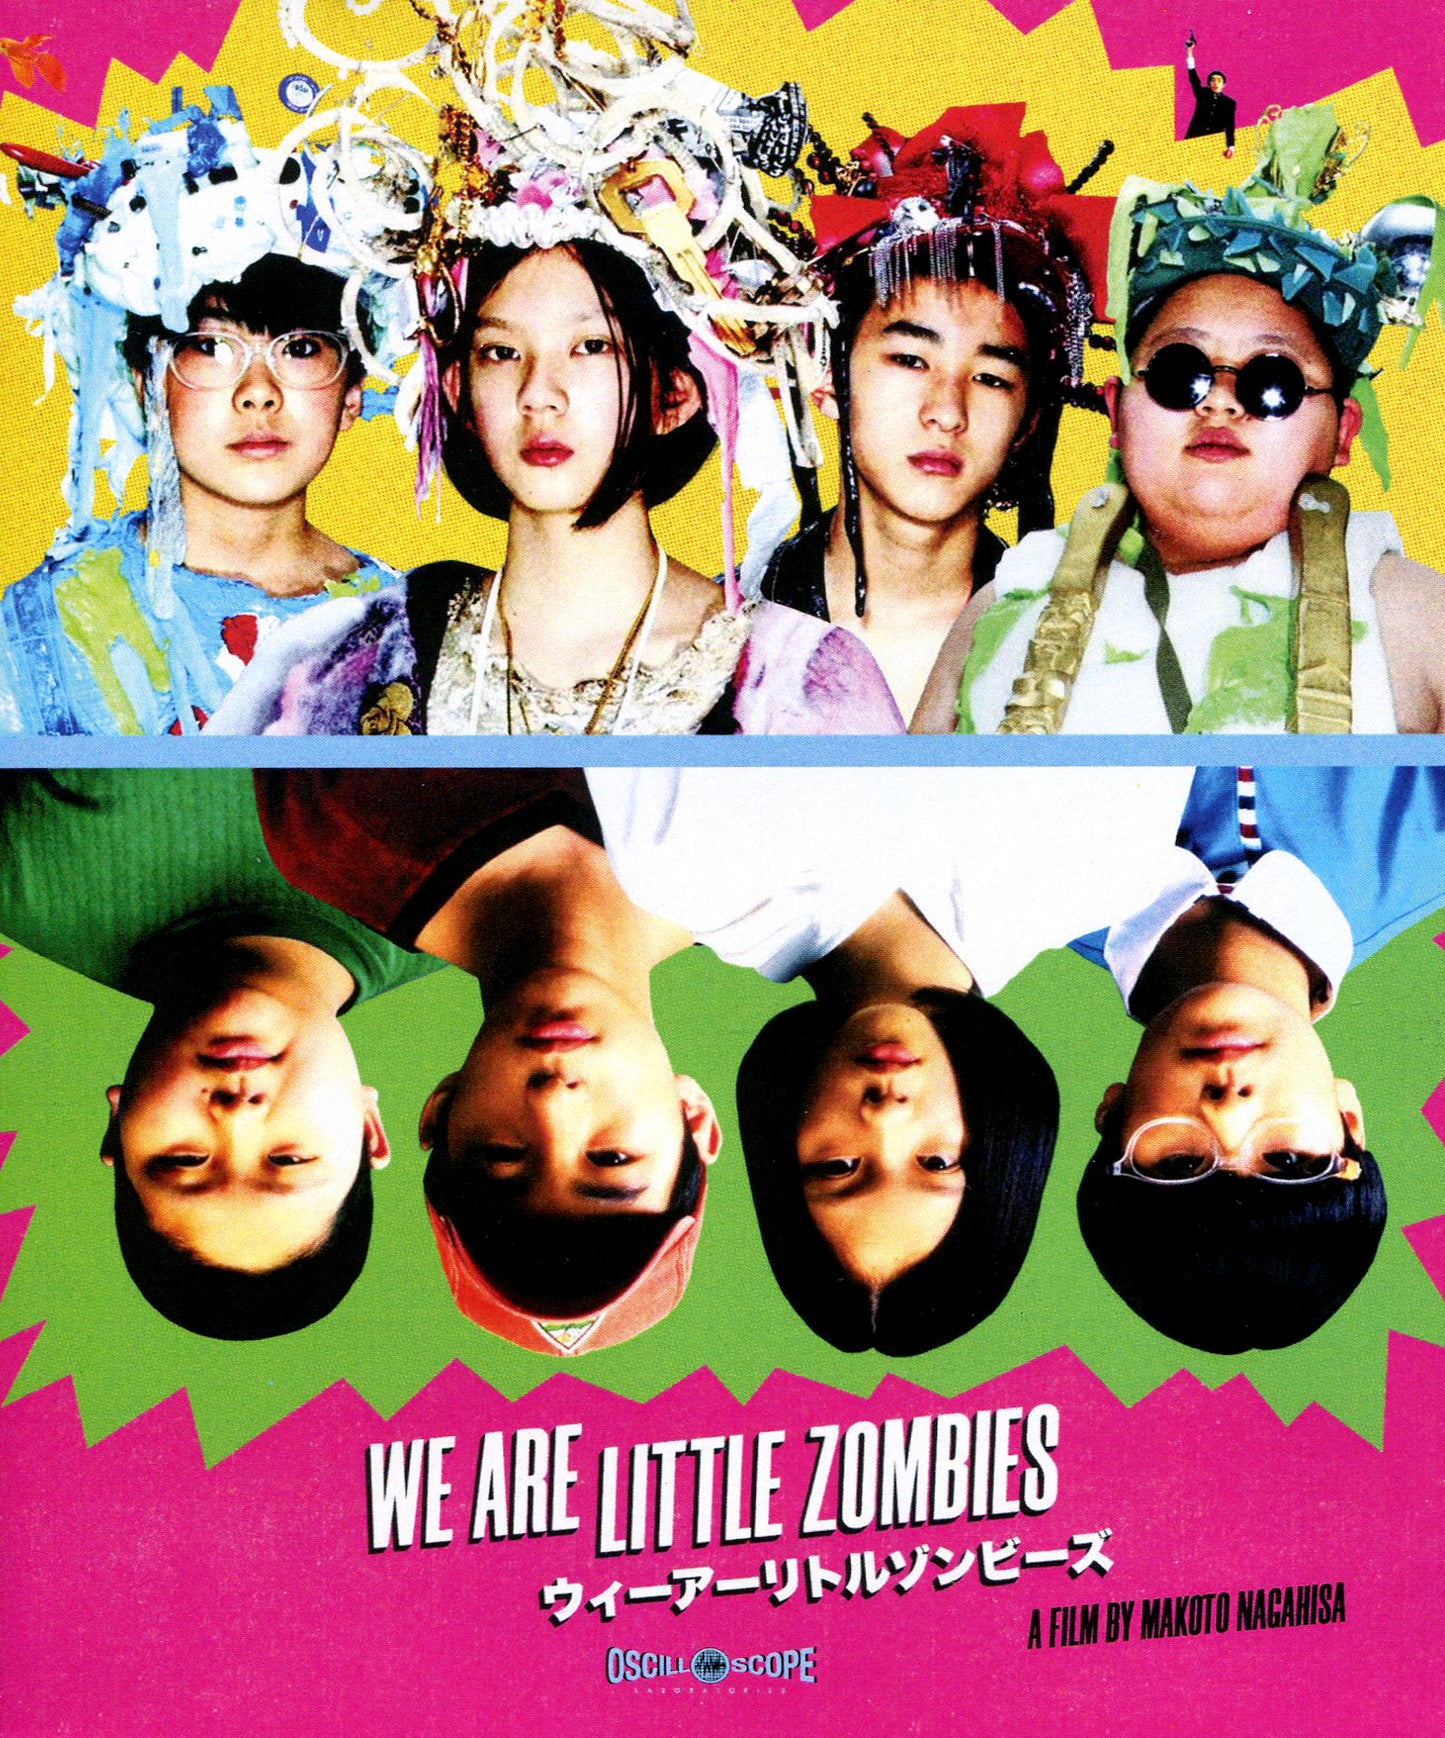 We Are Little Zombies [Blu-ray] cover art